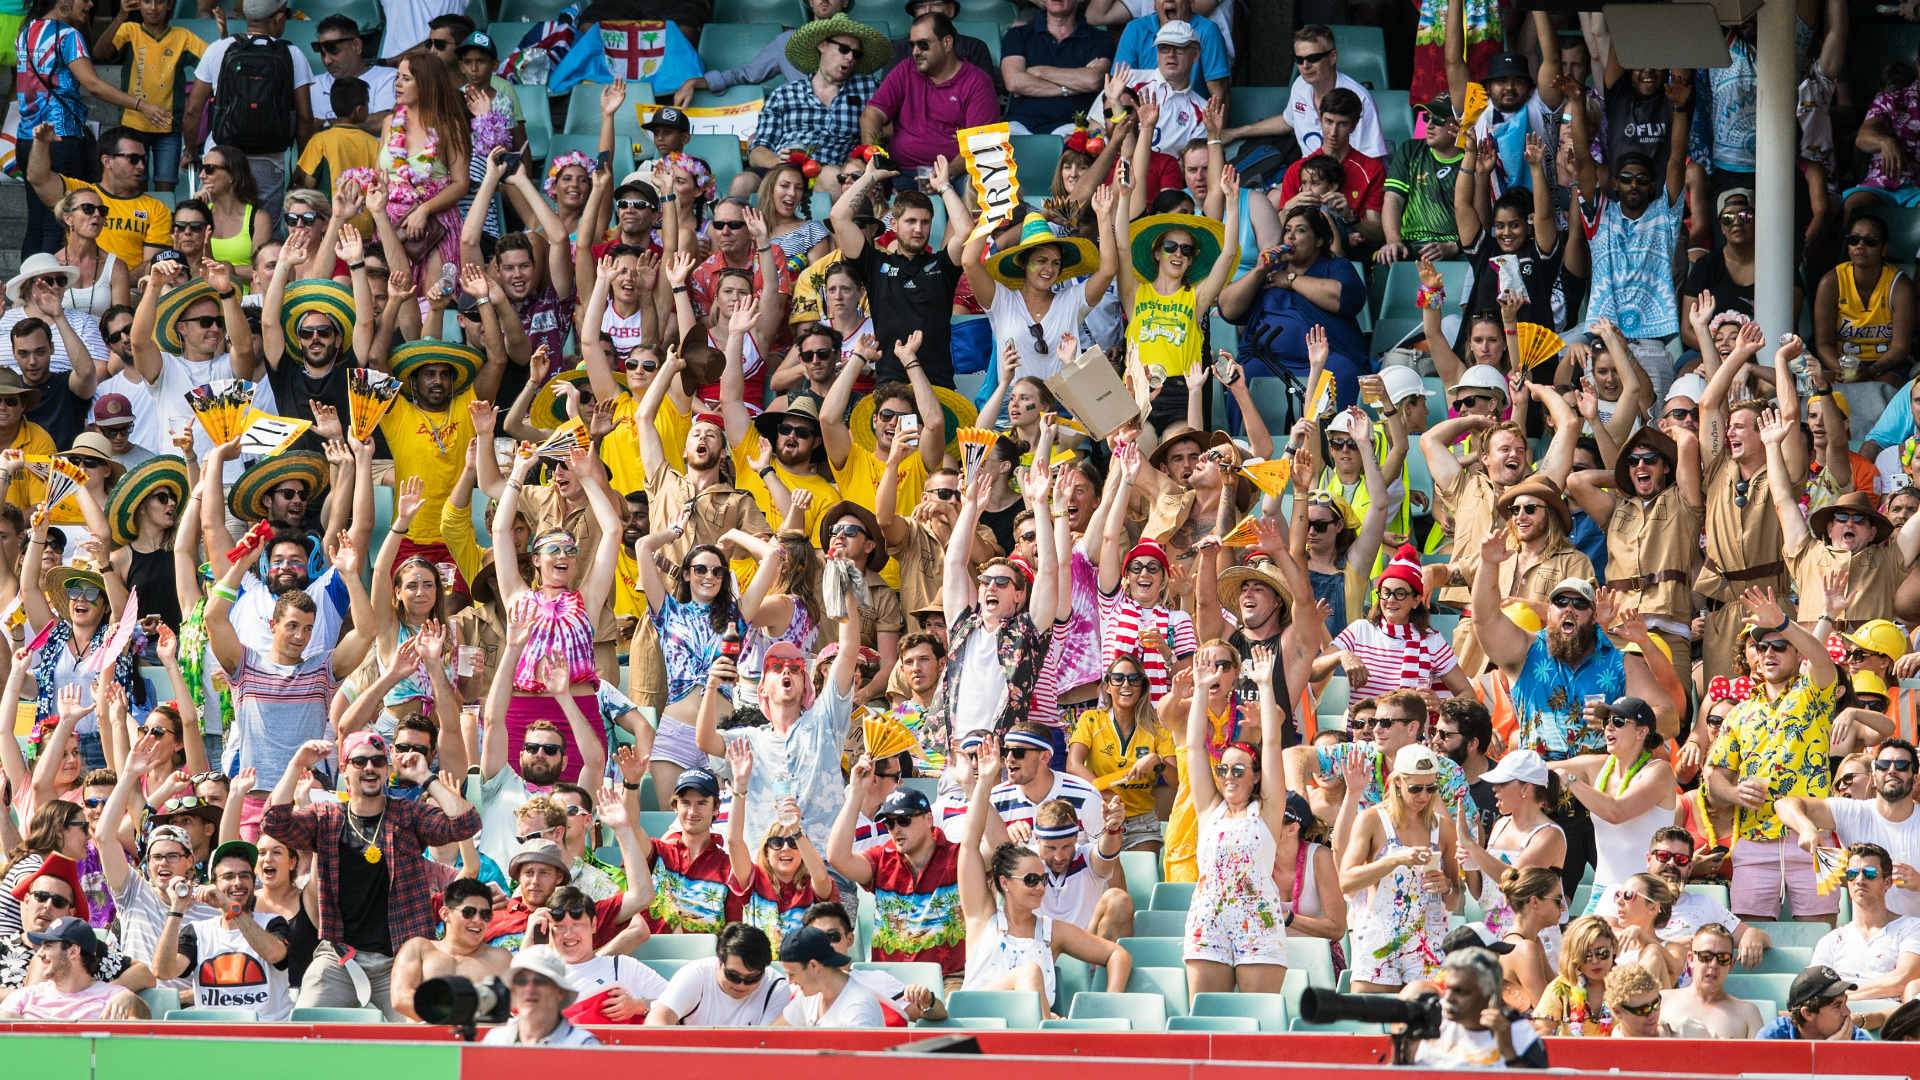 Seven Reasons to Plan a Group Staycation with Your Mates in Parramatta During the Sydney 7s